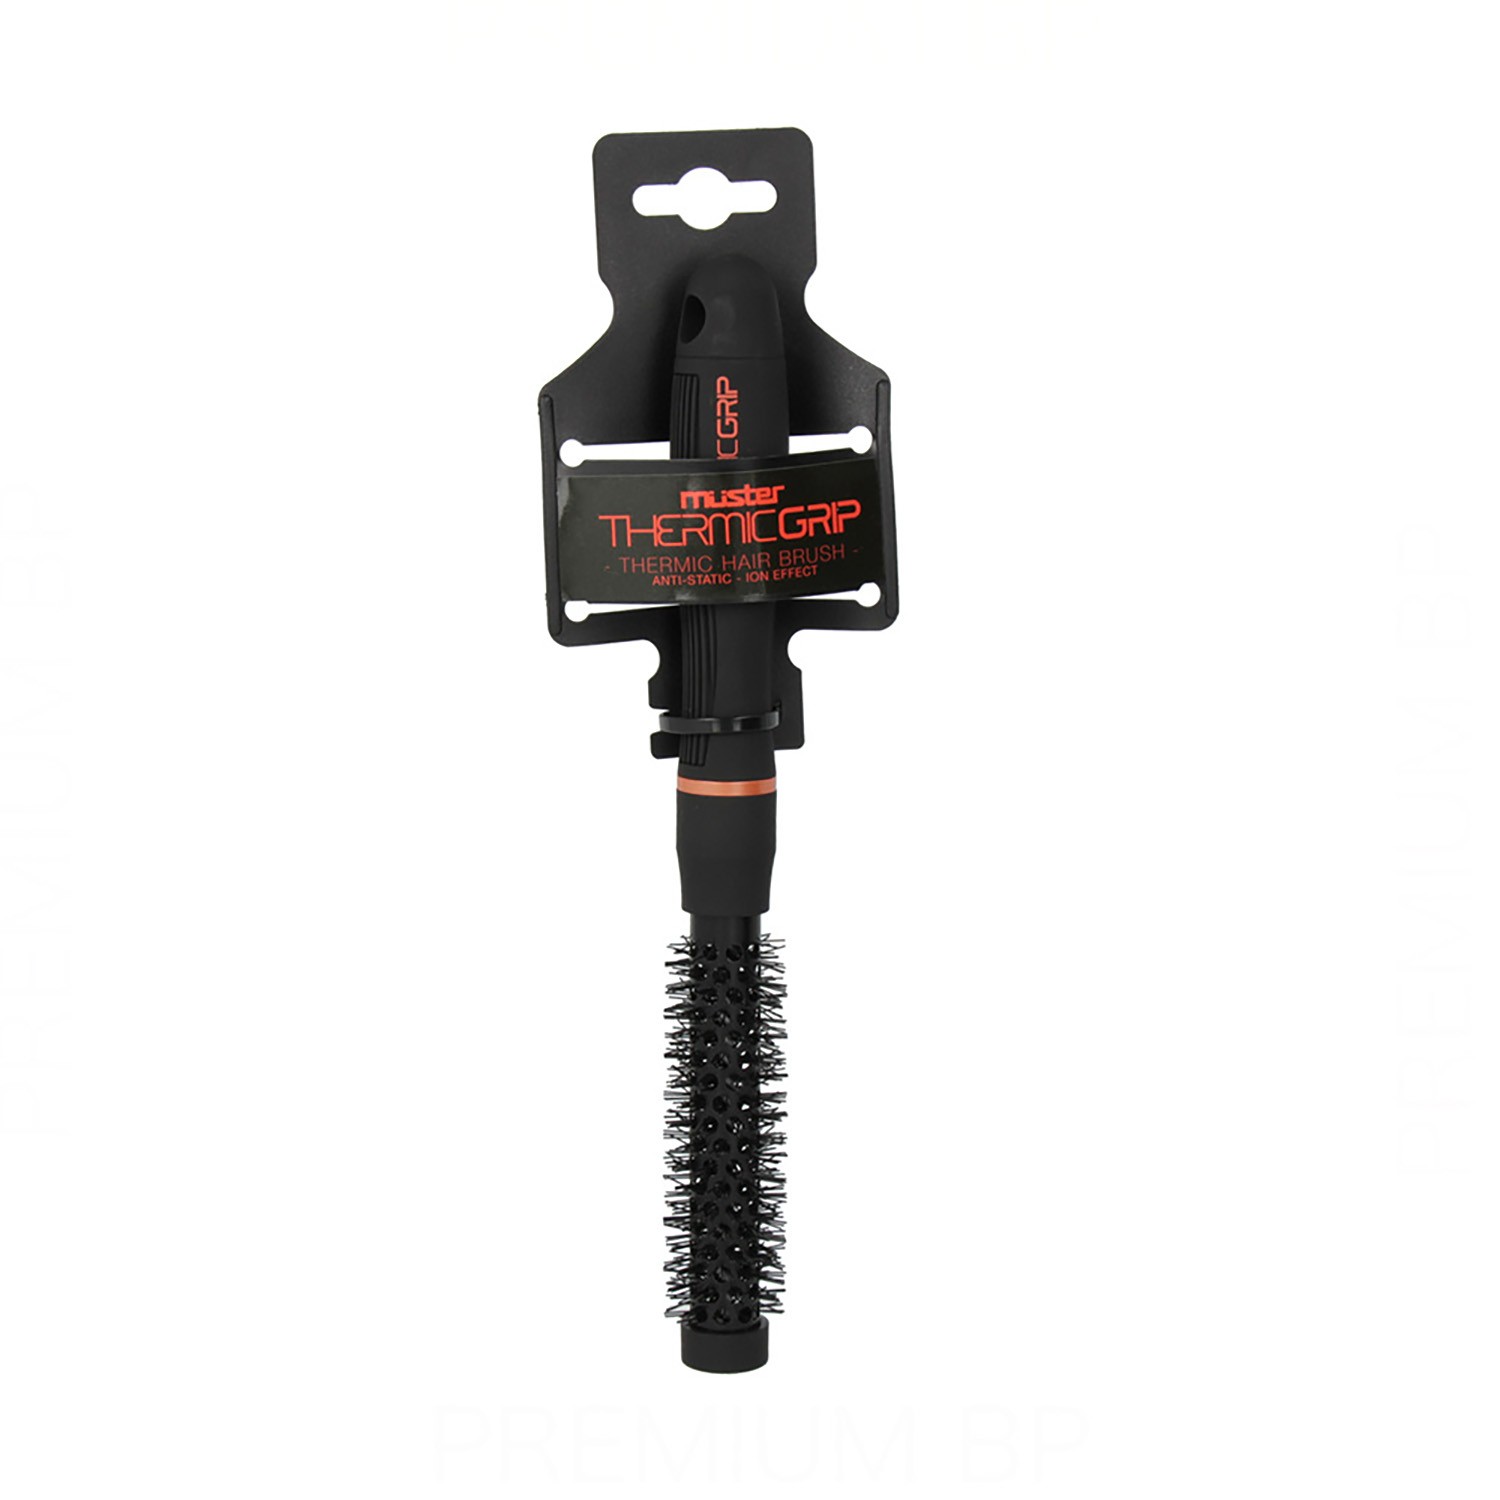 Muster Thermic Grip Cepillo Térmico Profesional 28 mm